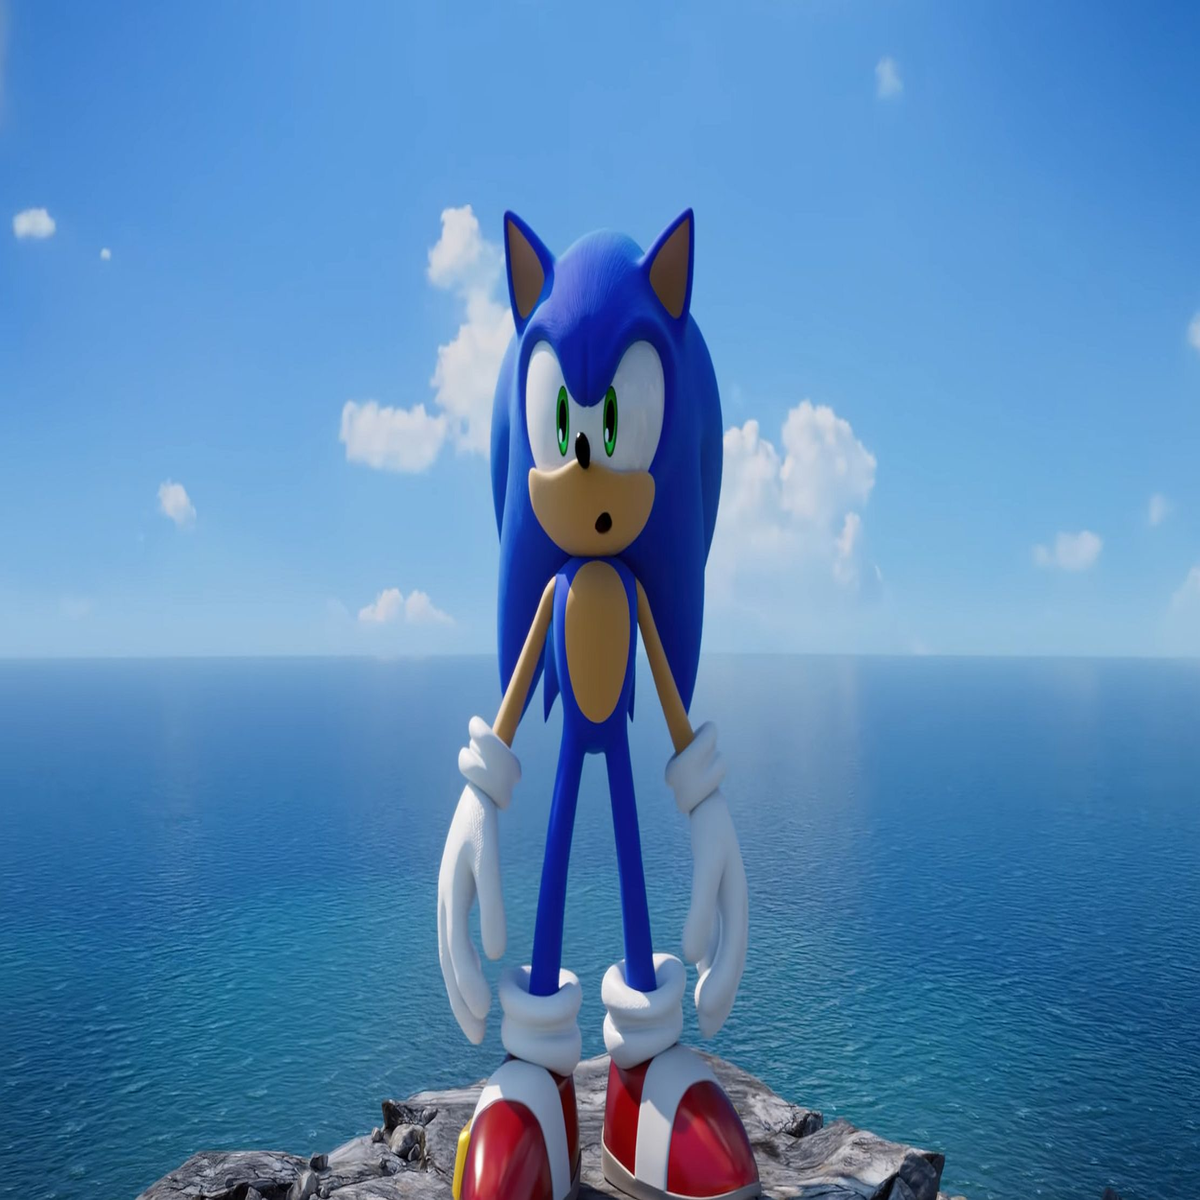 Sonic the Hedgehog Is Getting an Official New Game Inside Roblox - IGN